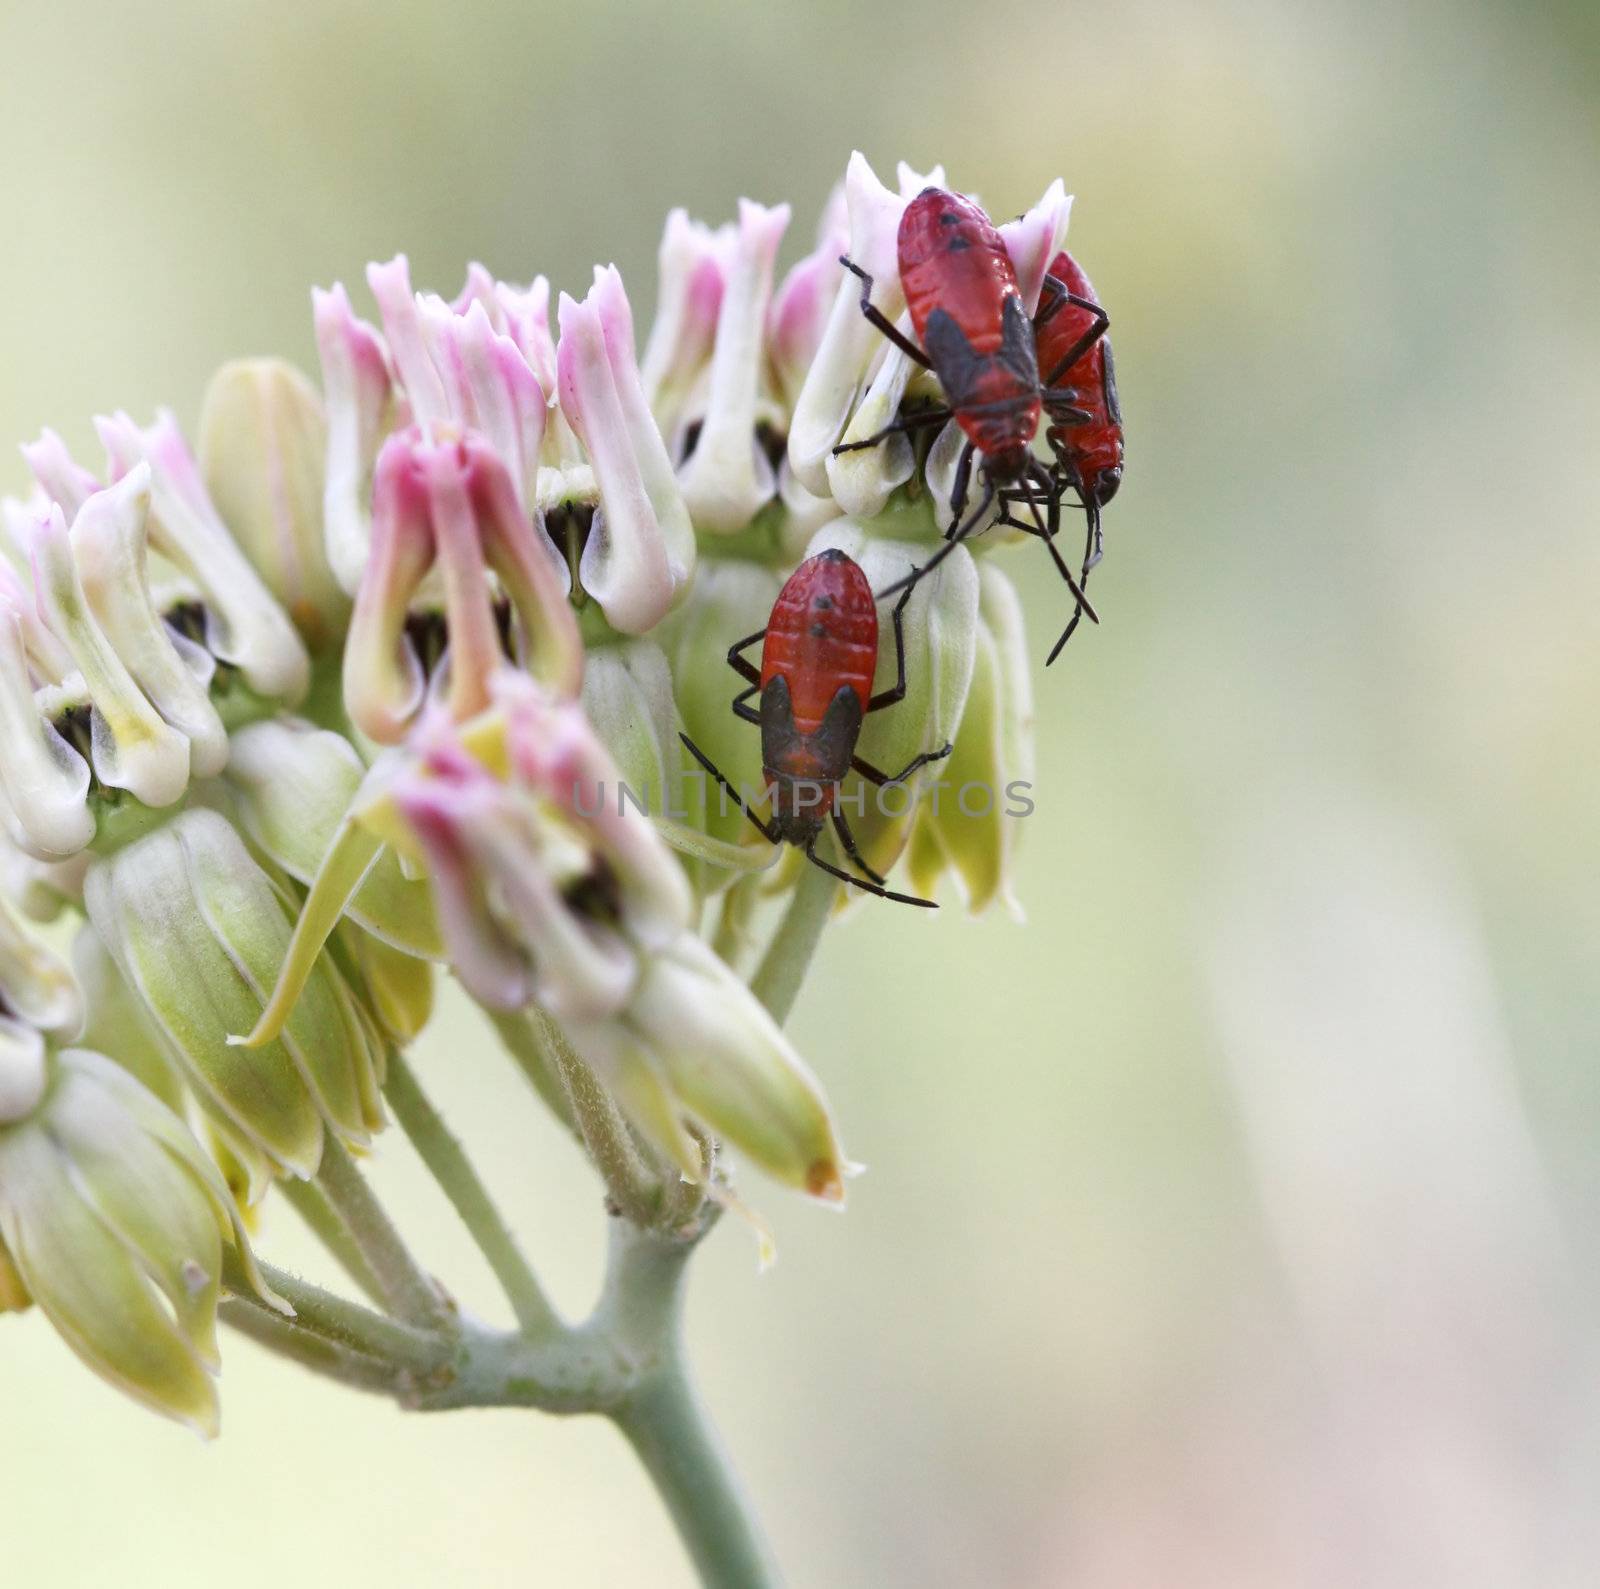 Red beetles crawling on flowers. Great macro shot and lots of detail on the bugs.